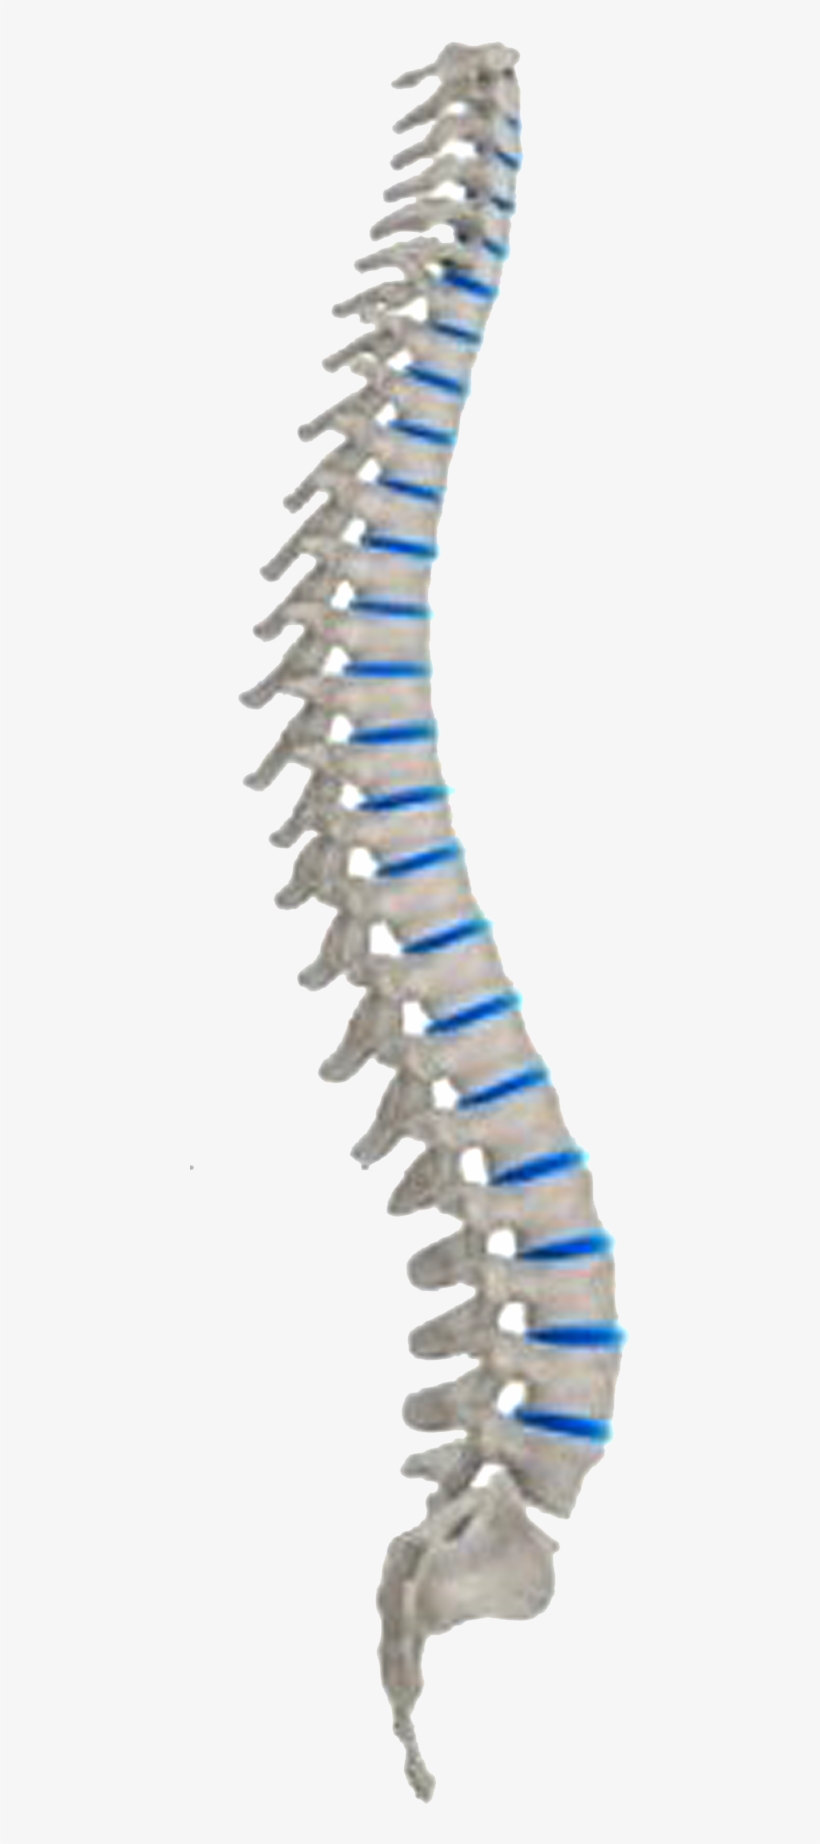 Structure Of Spine - Human Spine Png, transparent png #2382771